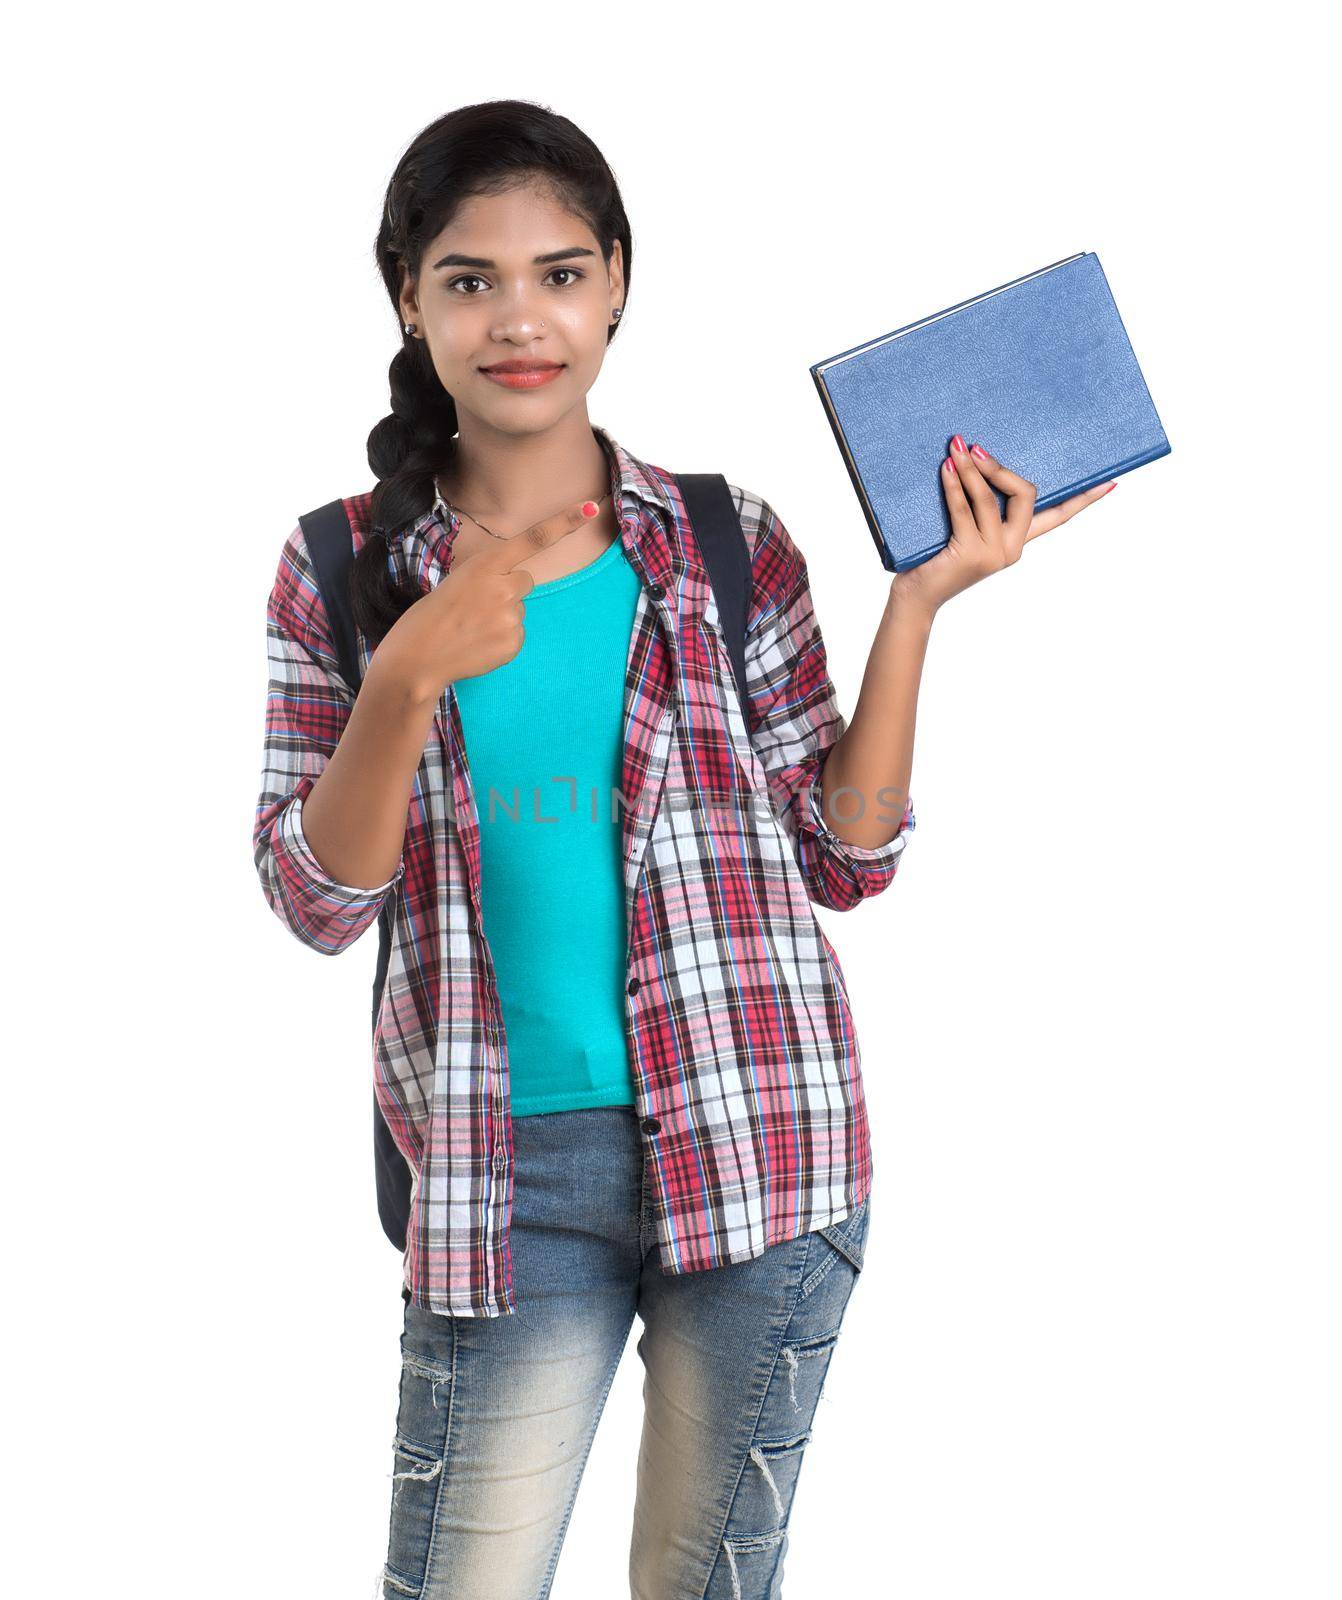 young Indian woman with backpack standing and holding notebooks, posing on a white background. by DipakShelare